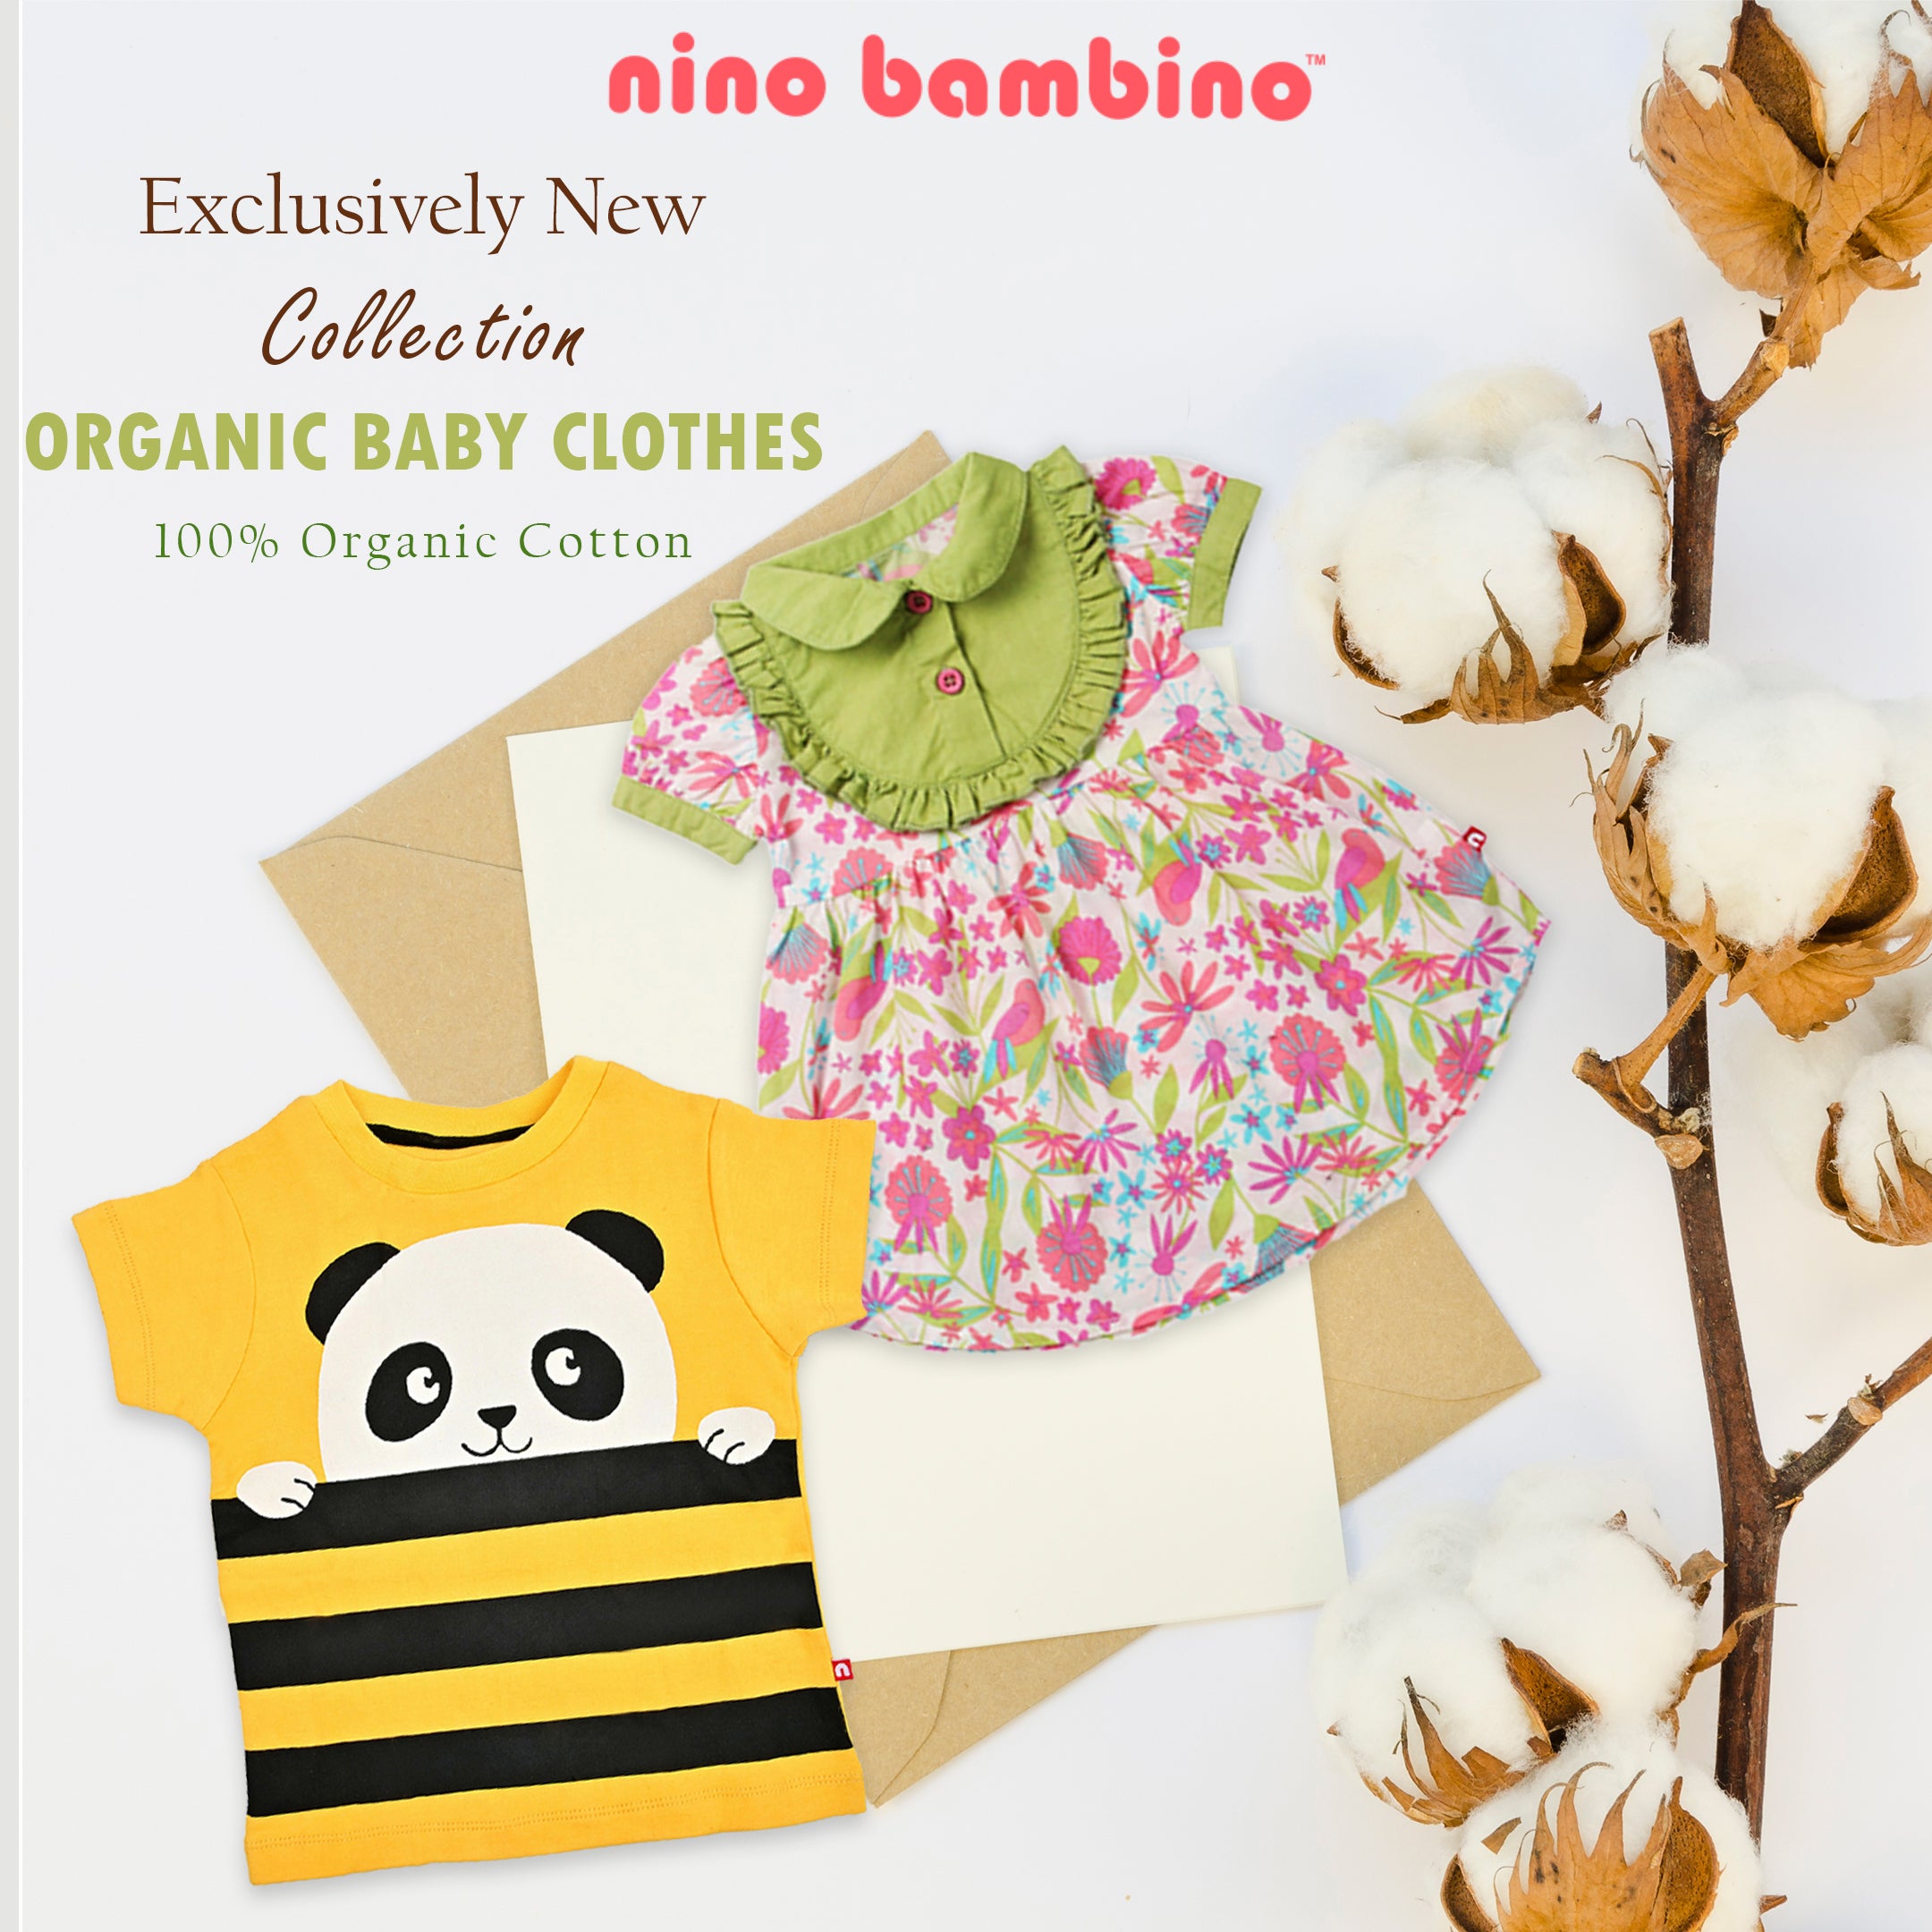 Organic Baby Clothes Keep Your Children Secure And Safe.